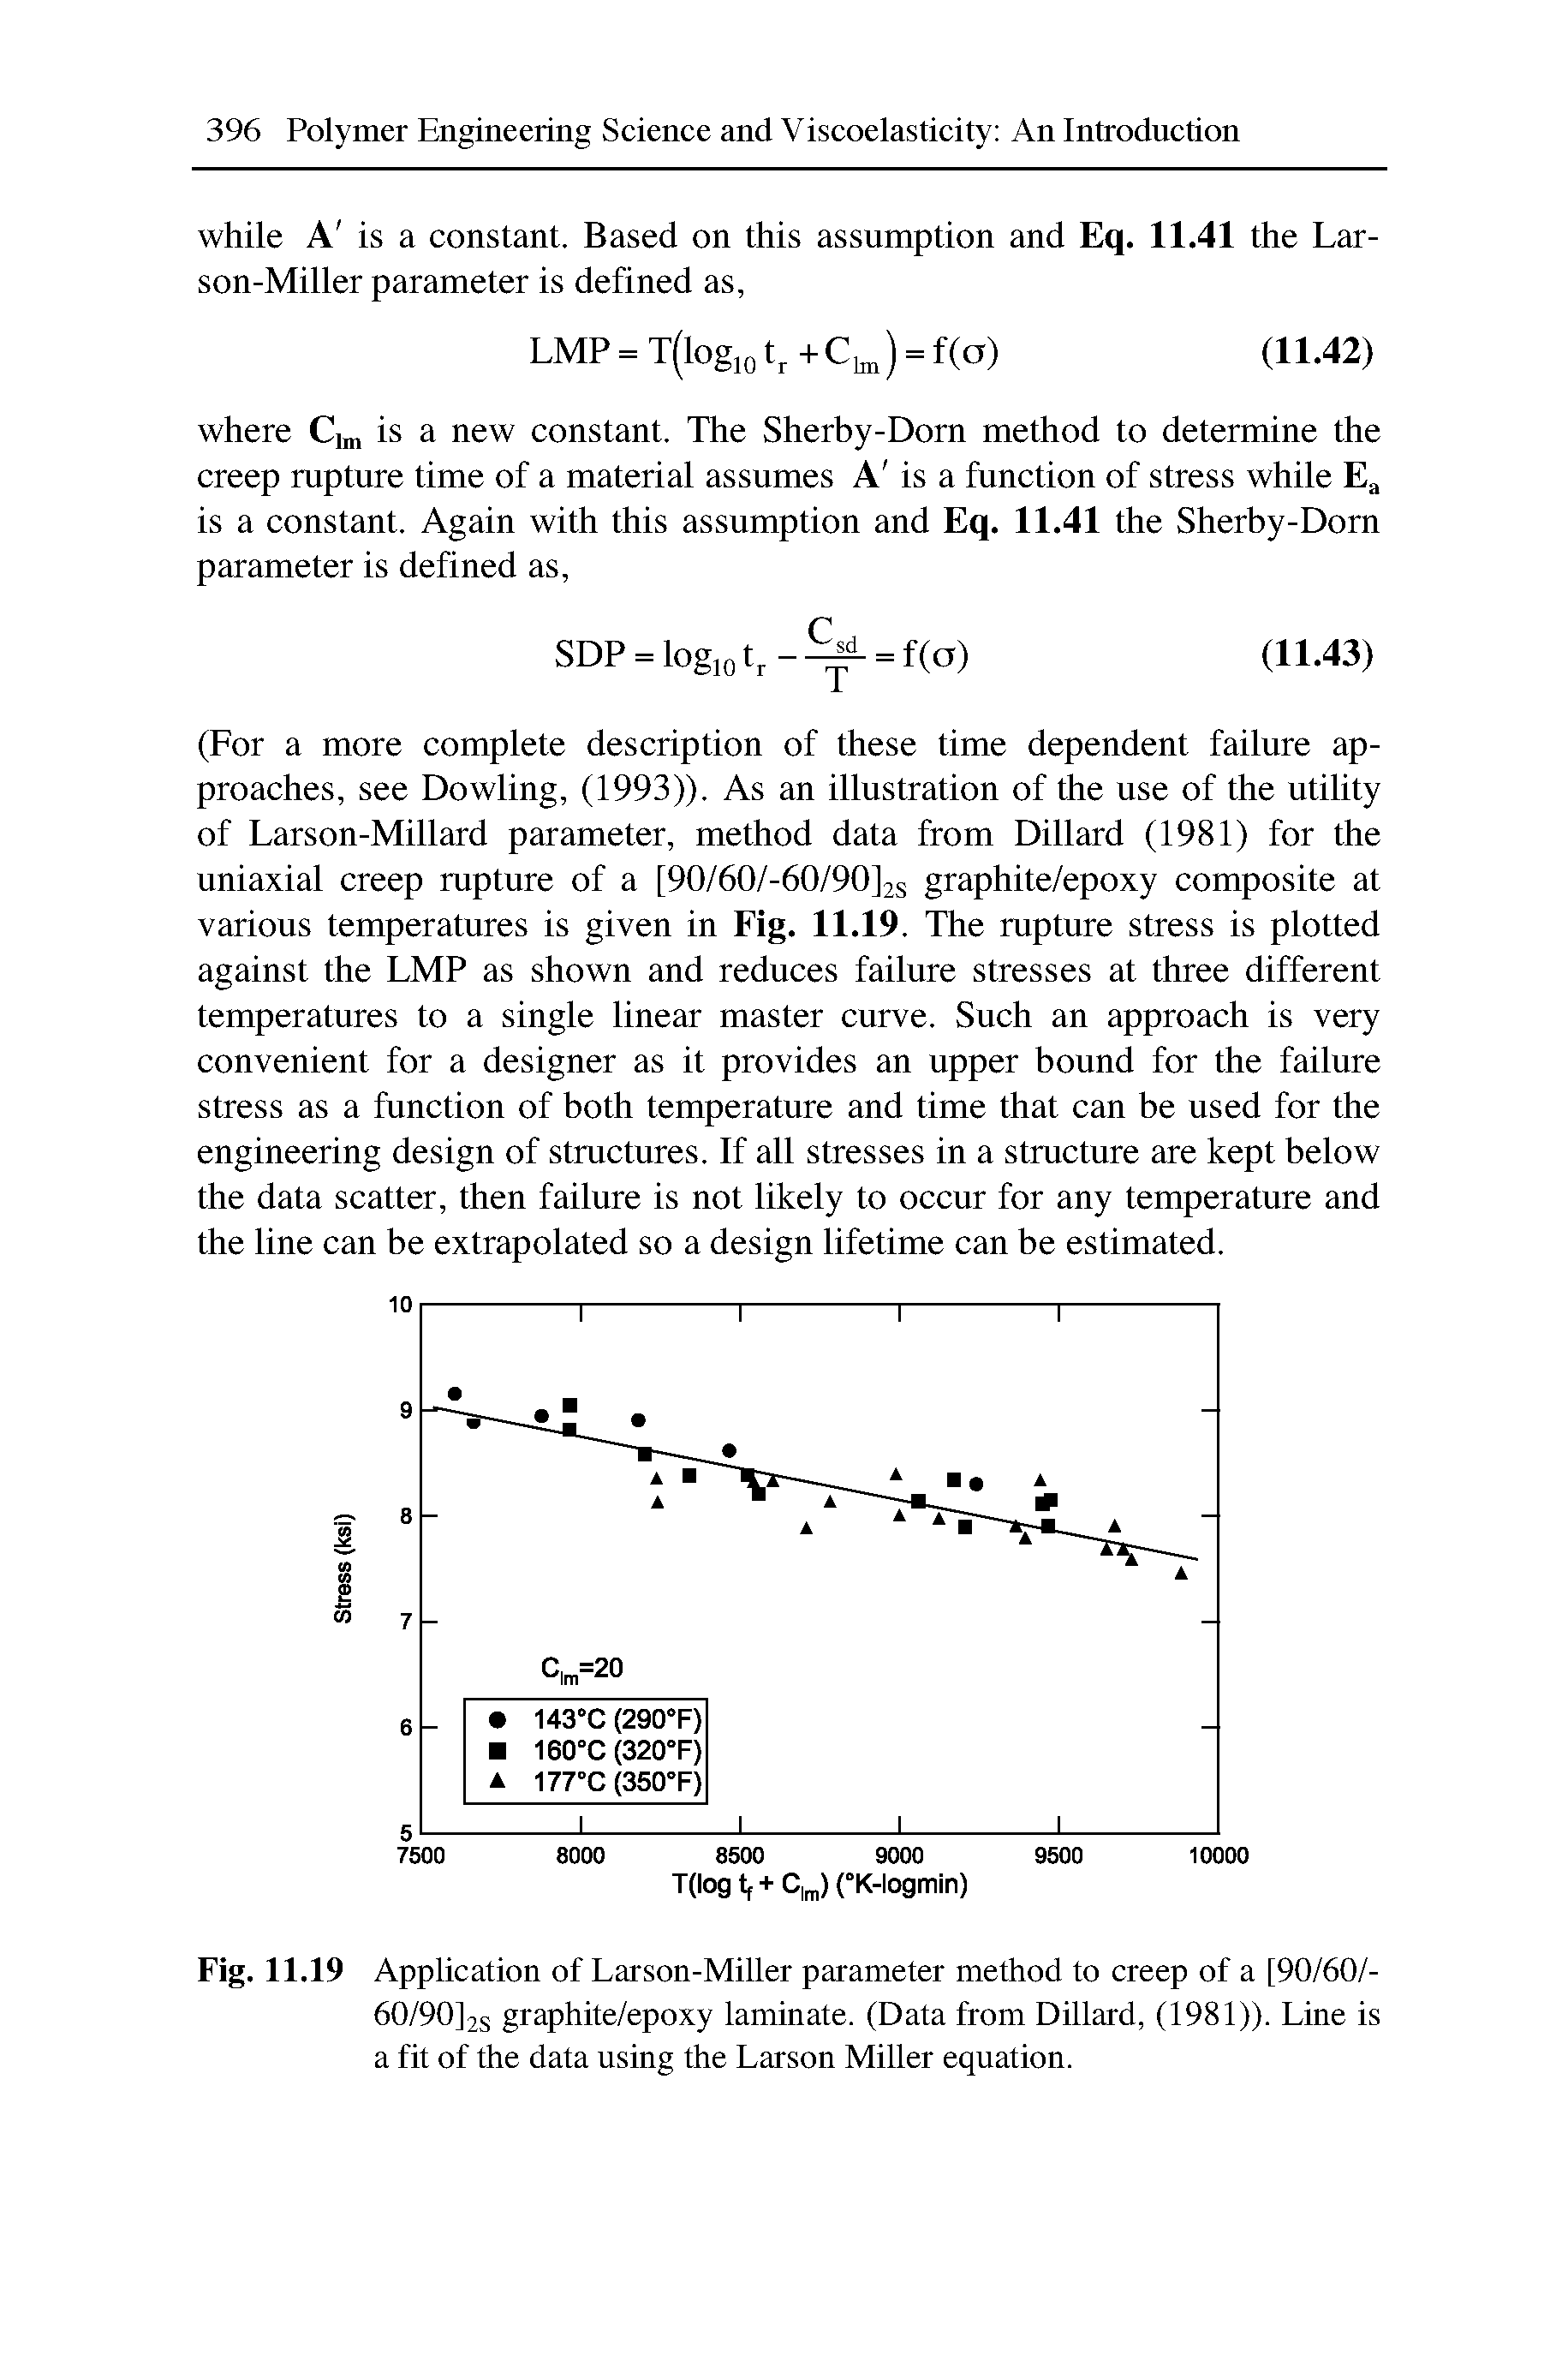 Fig. 11.19 Application of Larson-Miller parameter method to creep of a [90/60/-60/90J2S graphite/epoxy laminate. (Data from Dillard, (1981)). Line is a fit of the data using the Larson Miller equation.